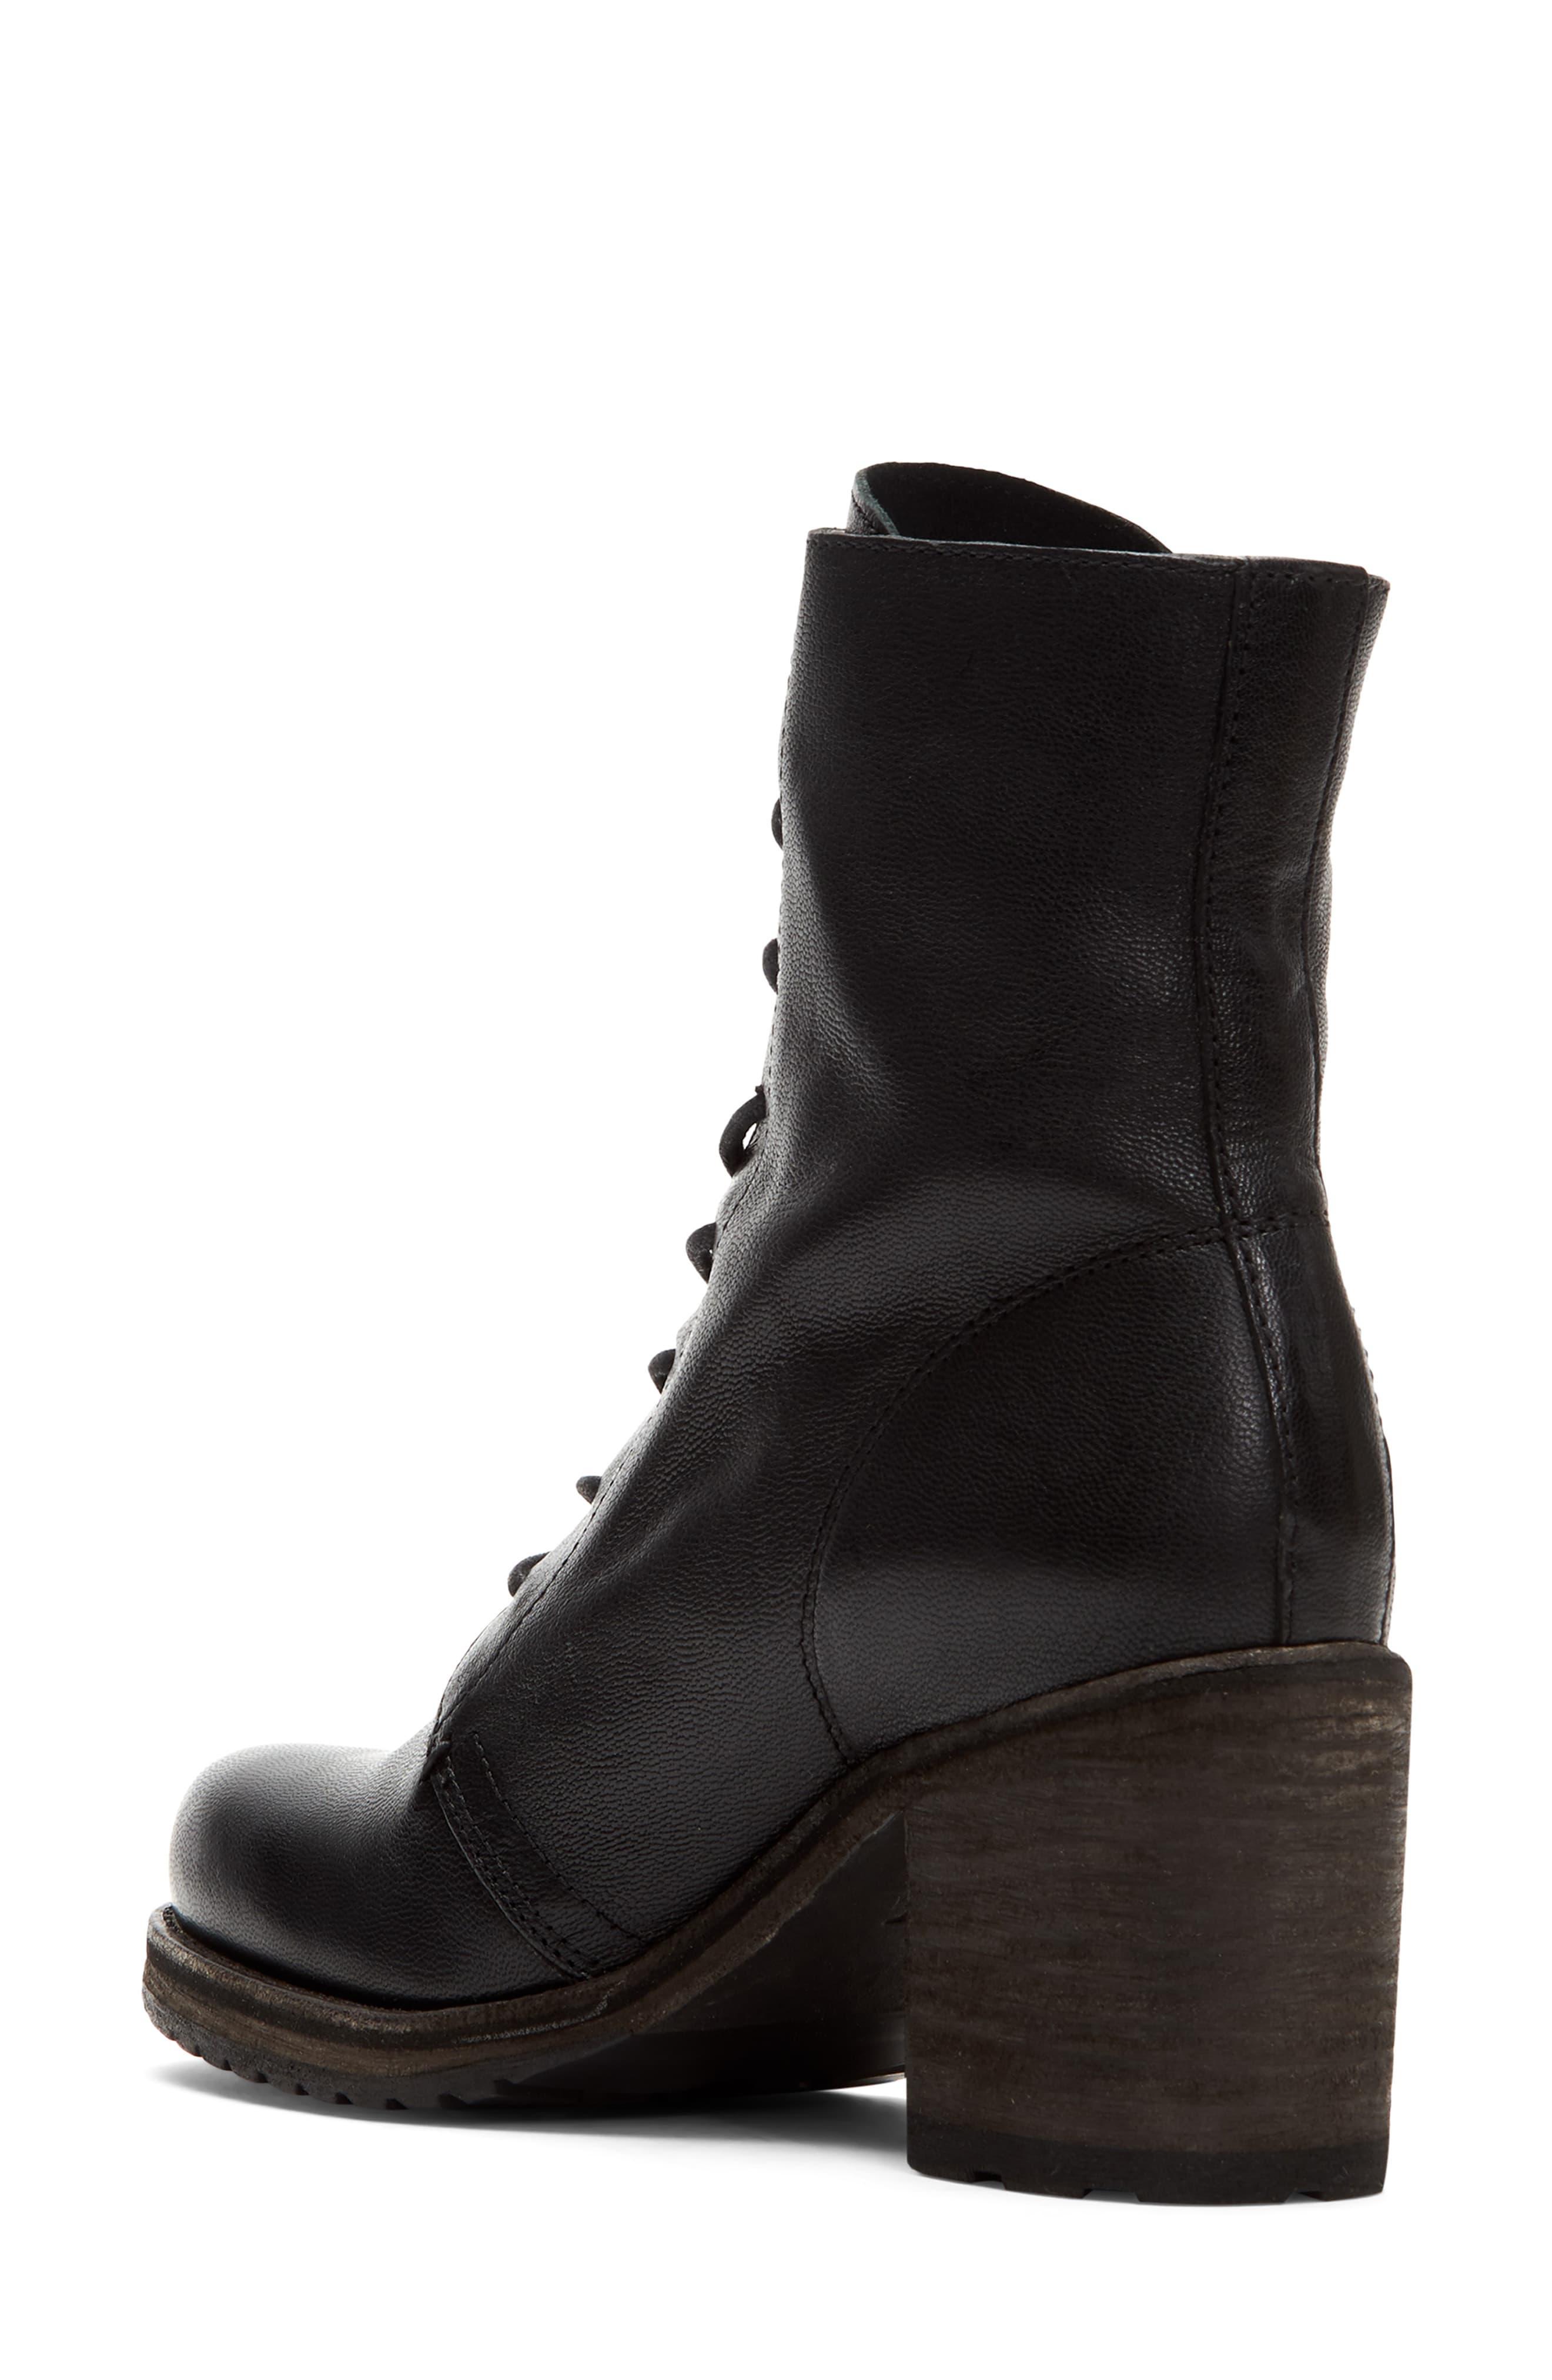 Frye Leather Karen Combat Boot in Black Leather (Black) - Save 25% - Lyst